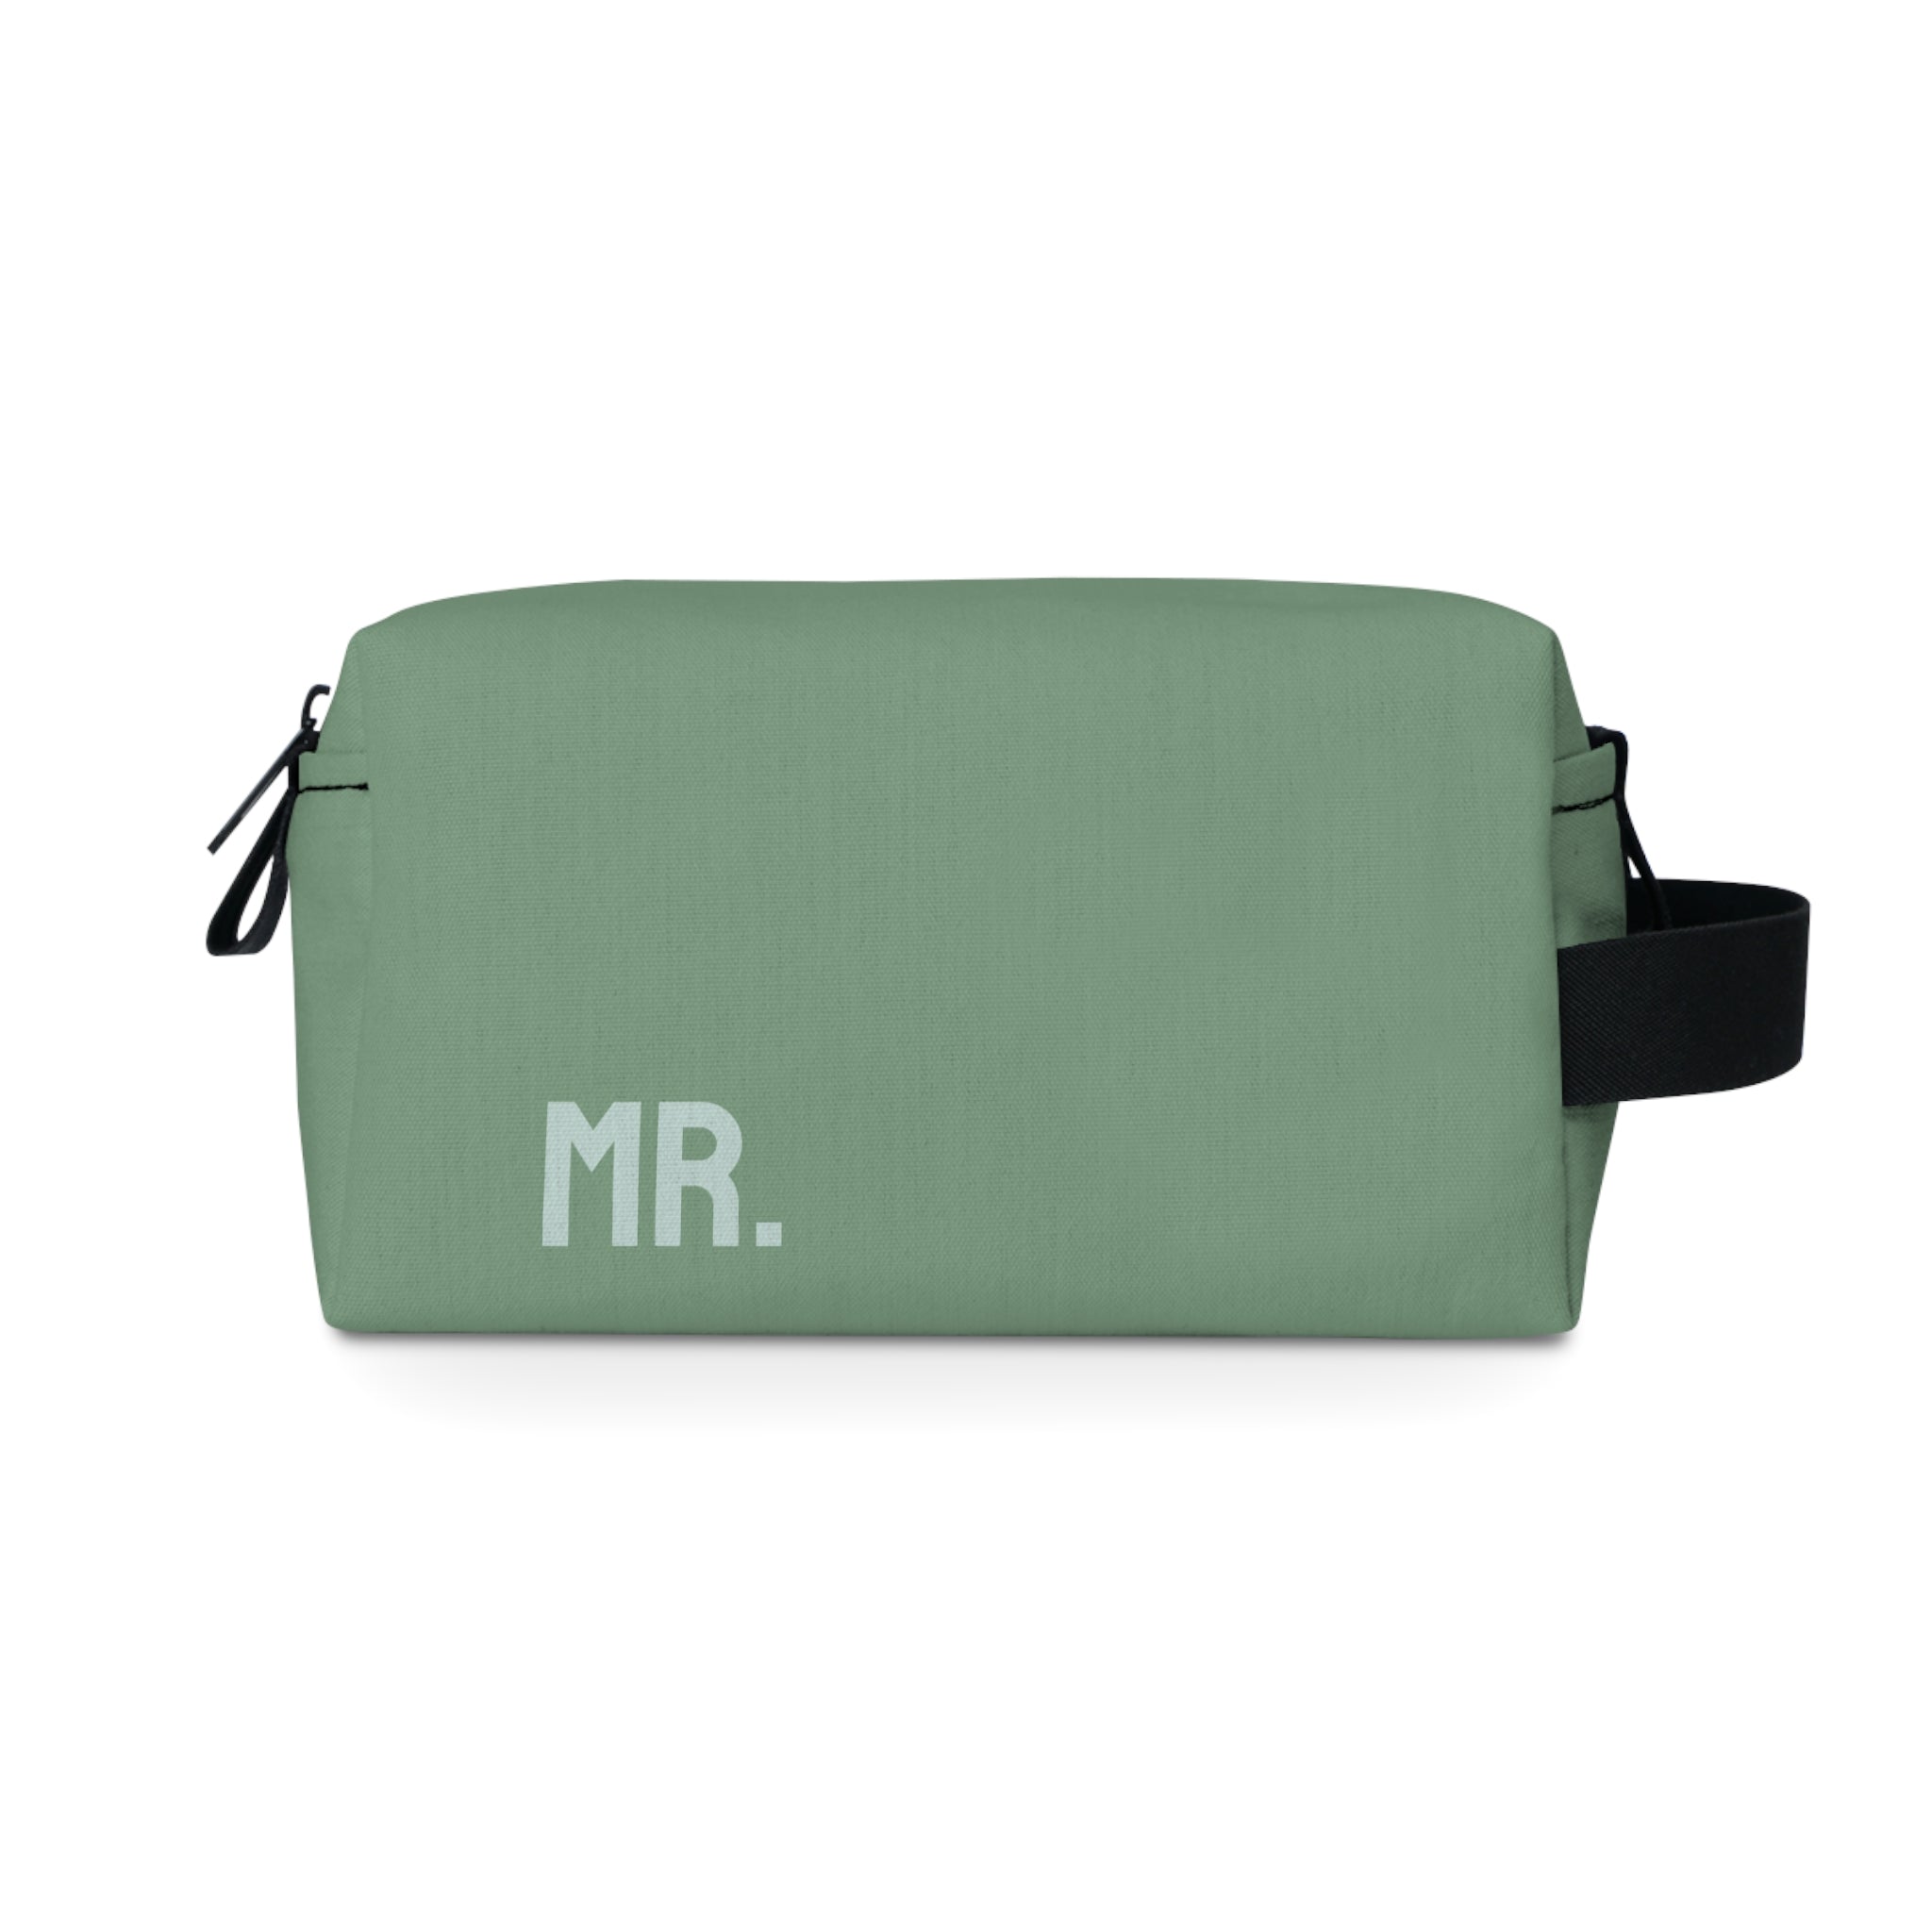 Mr. Toiletry Pouch (Green)